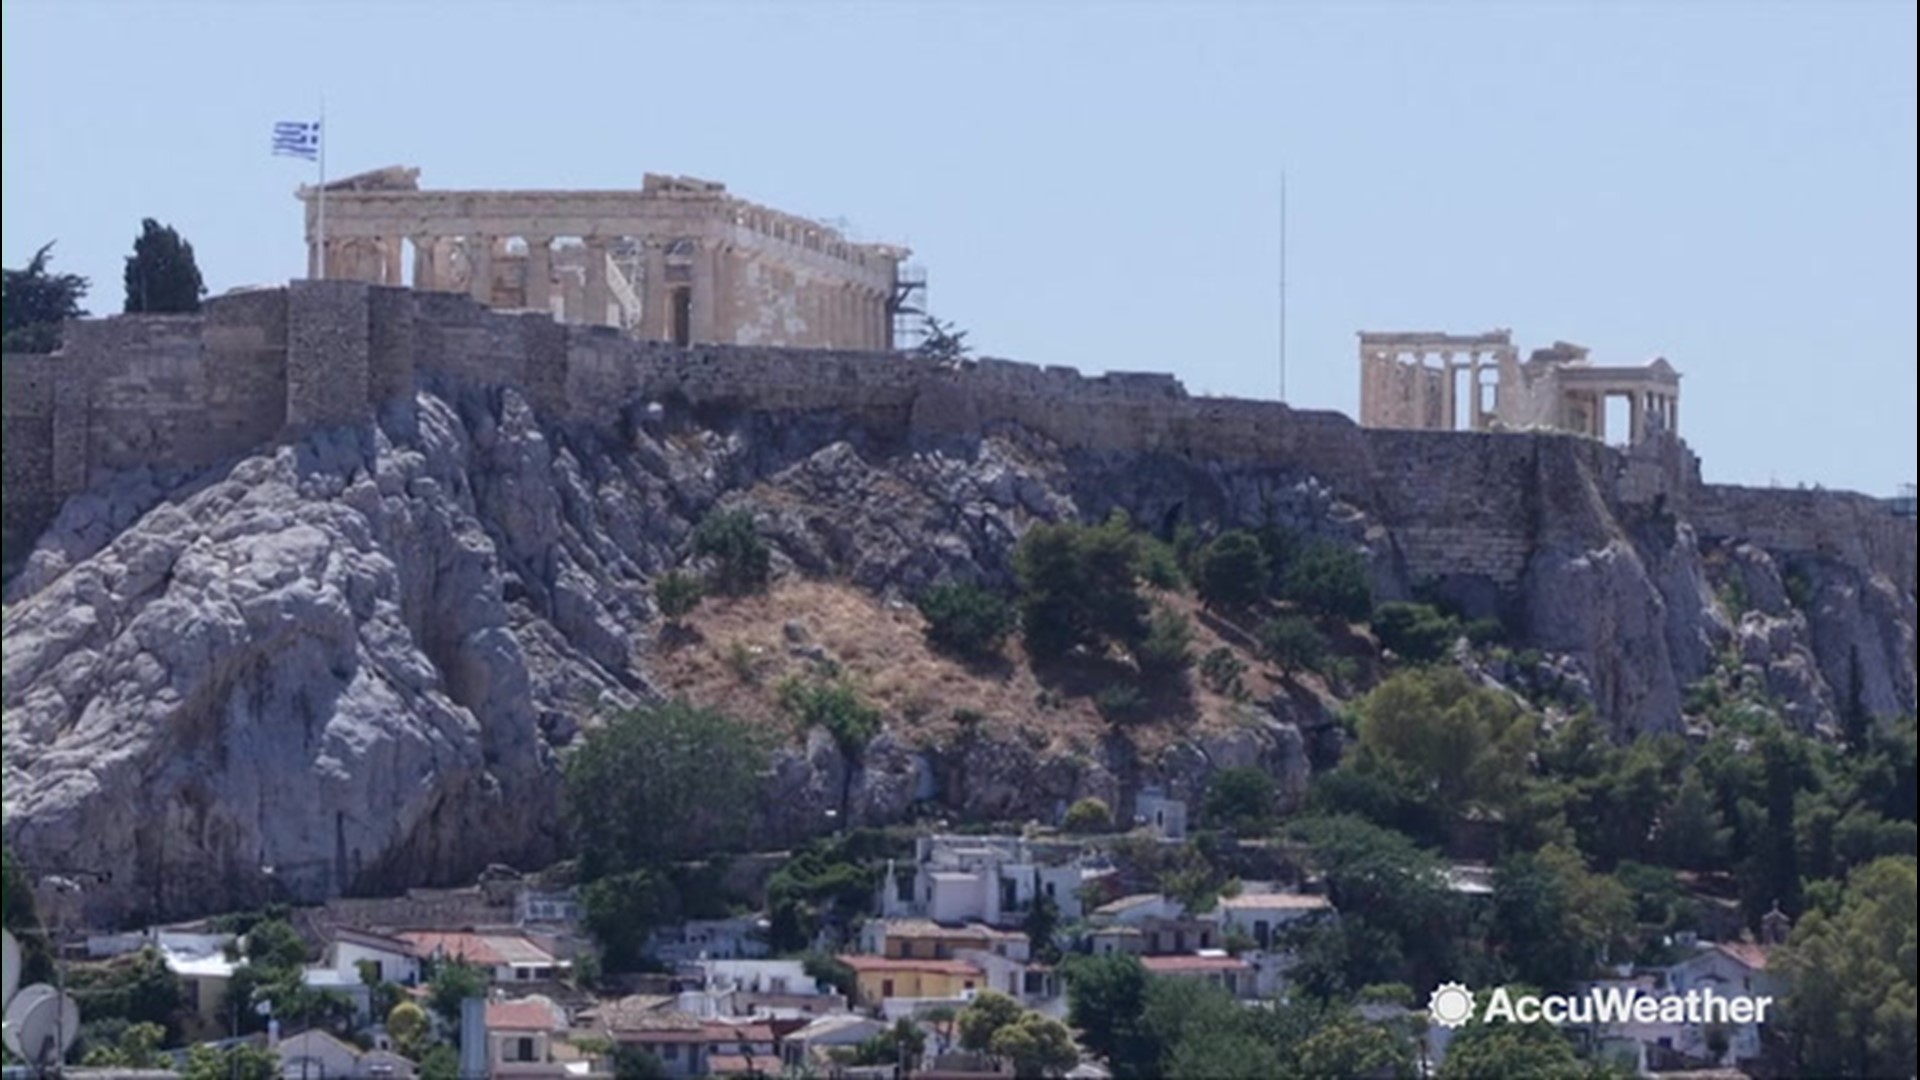 The Acropolis archaeological site, in Athens, Greece, was closed for a few hours on Thursday, July 4, by officials as the Greek capital experienced extreme heat. Temperatures at points reached about 107 degrees Fahrenheit in the sun.